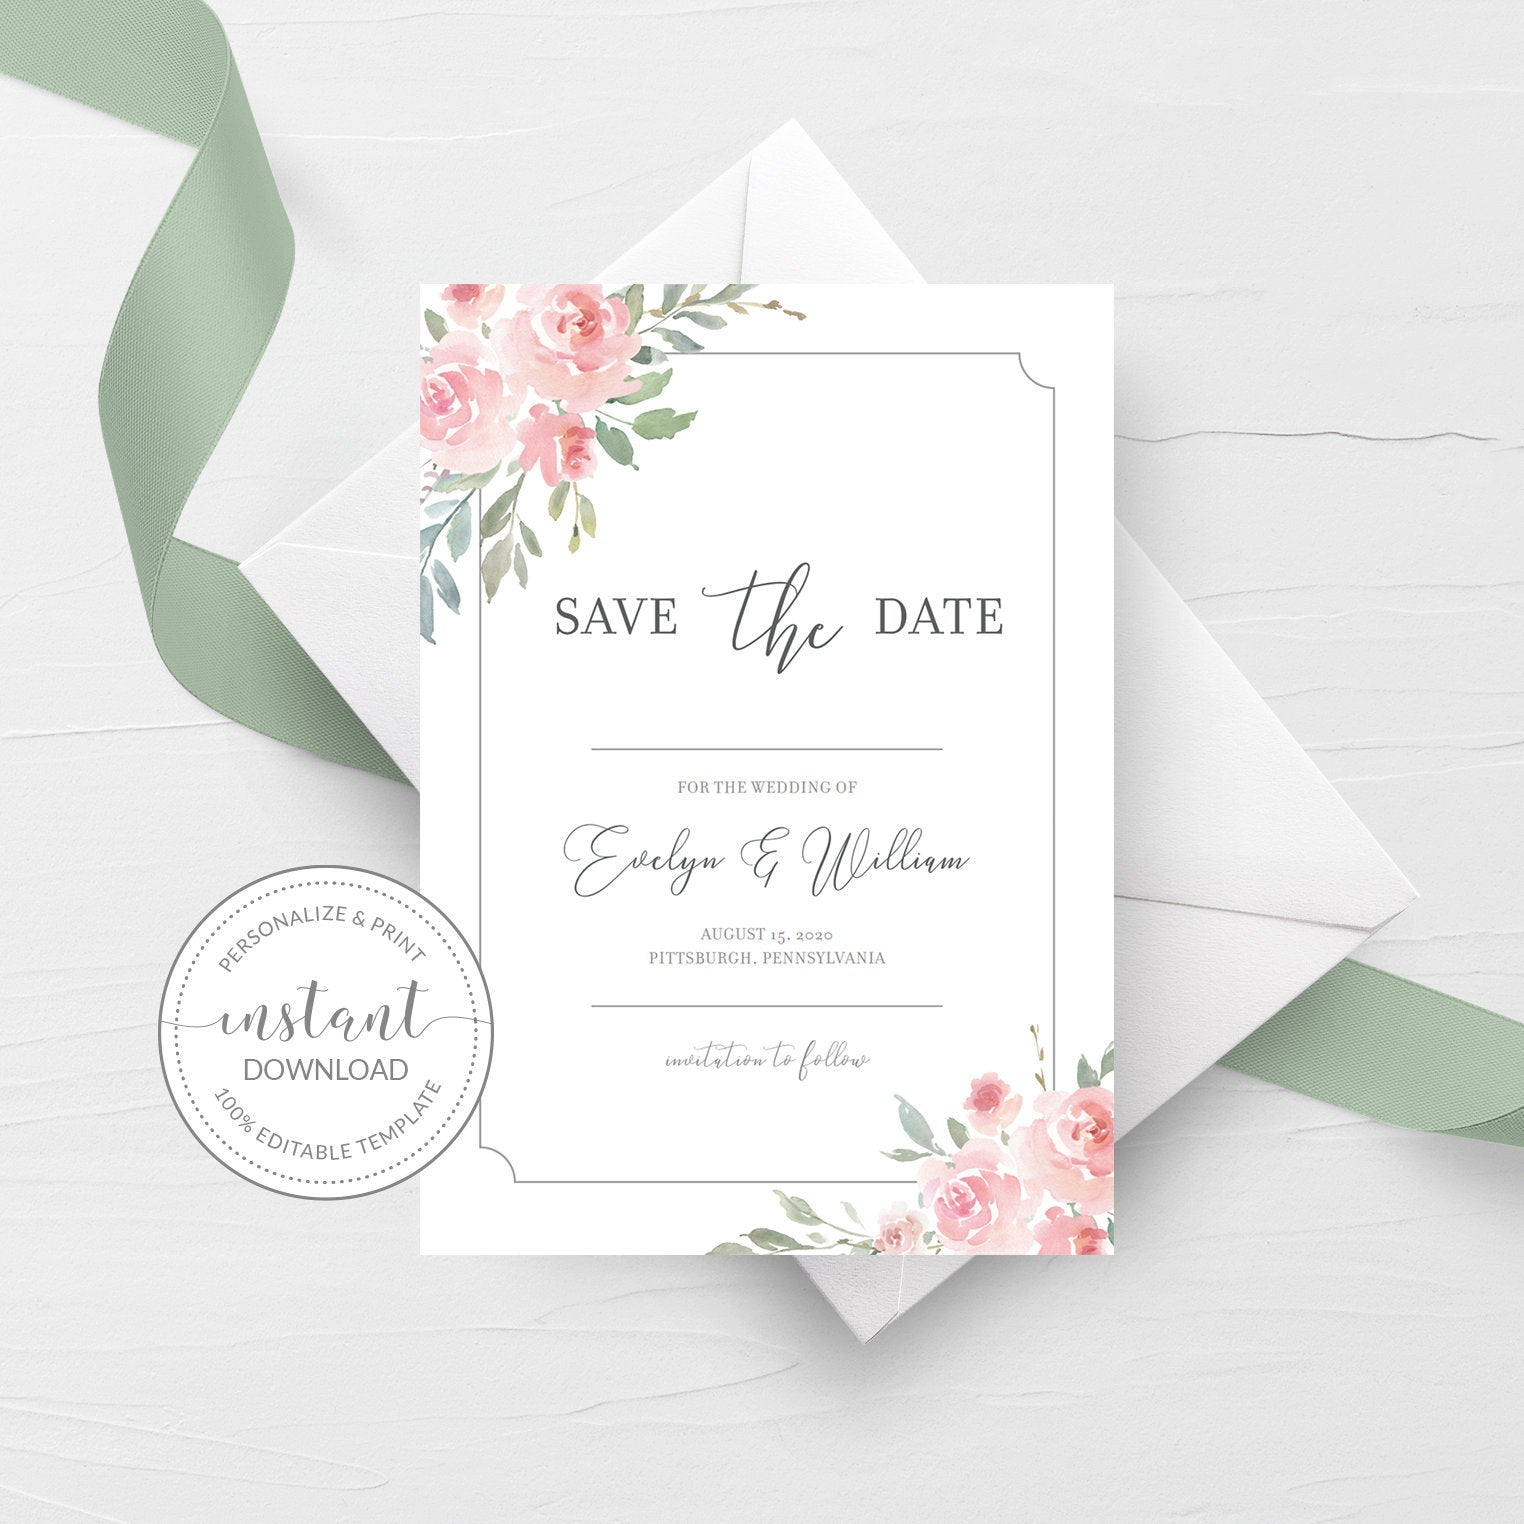 Blush Pink Floral Save The Date Card Template, Printable Wedding Announcement, Editable INSTANT DOWNLOAD - FR100